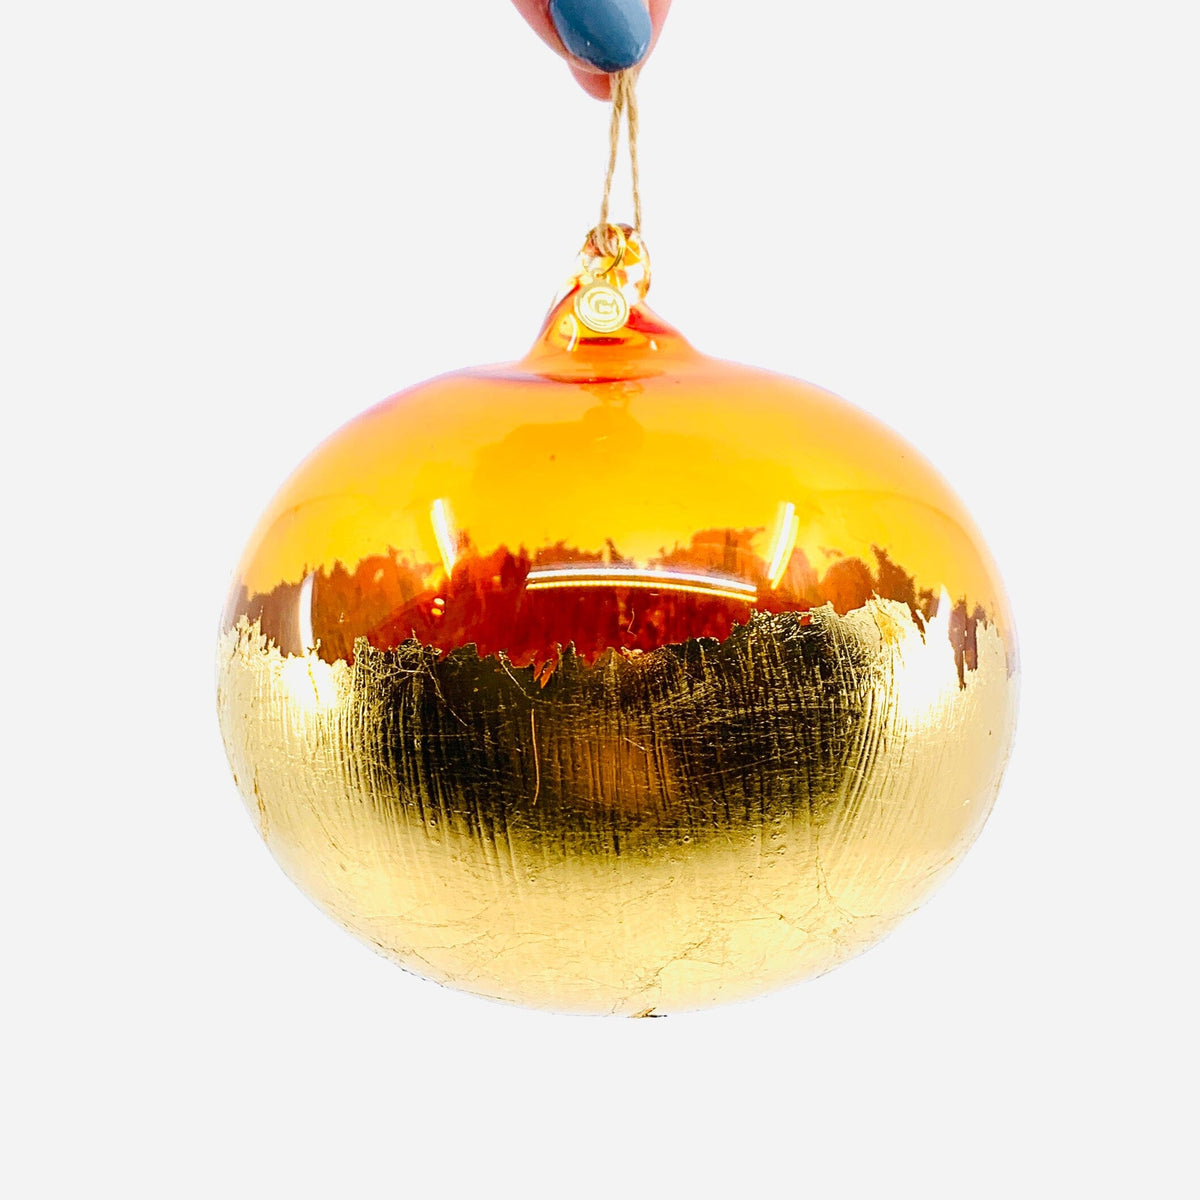 Rainbow Gold Dipped Orb Ornament One Hundred 80 Degrees L 